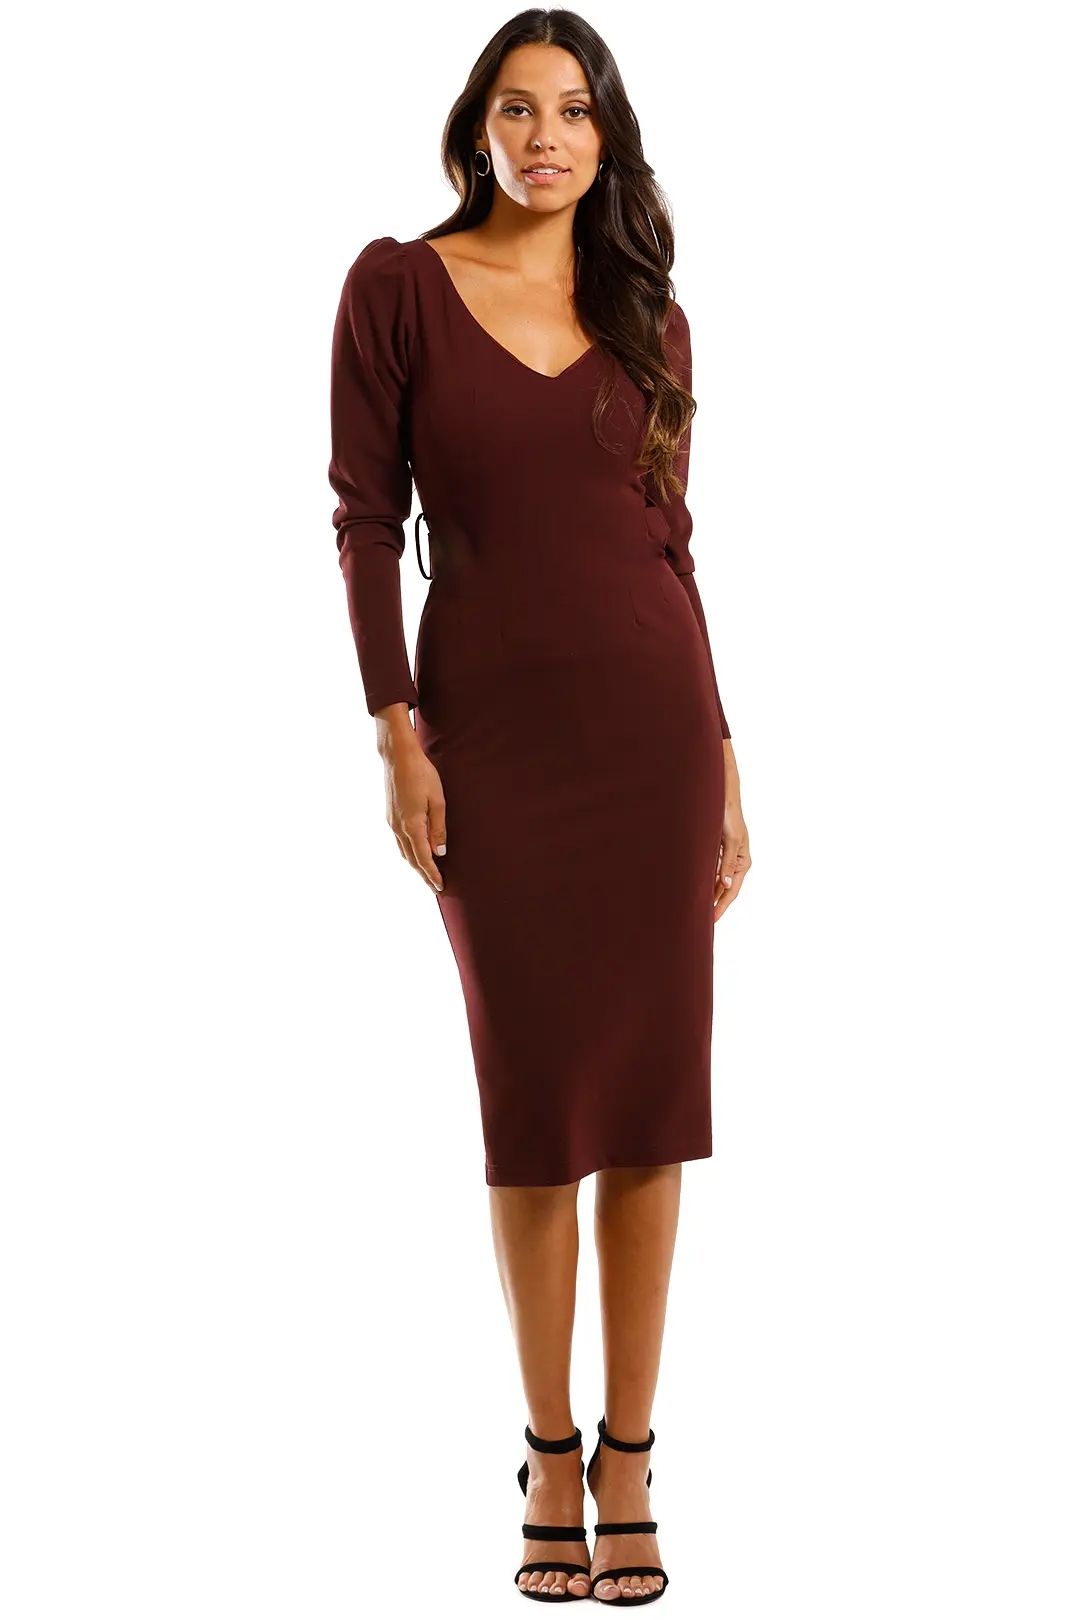 Pasduchas Clich Midi Port Burgundy Dress Fitted Long Sleeves